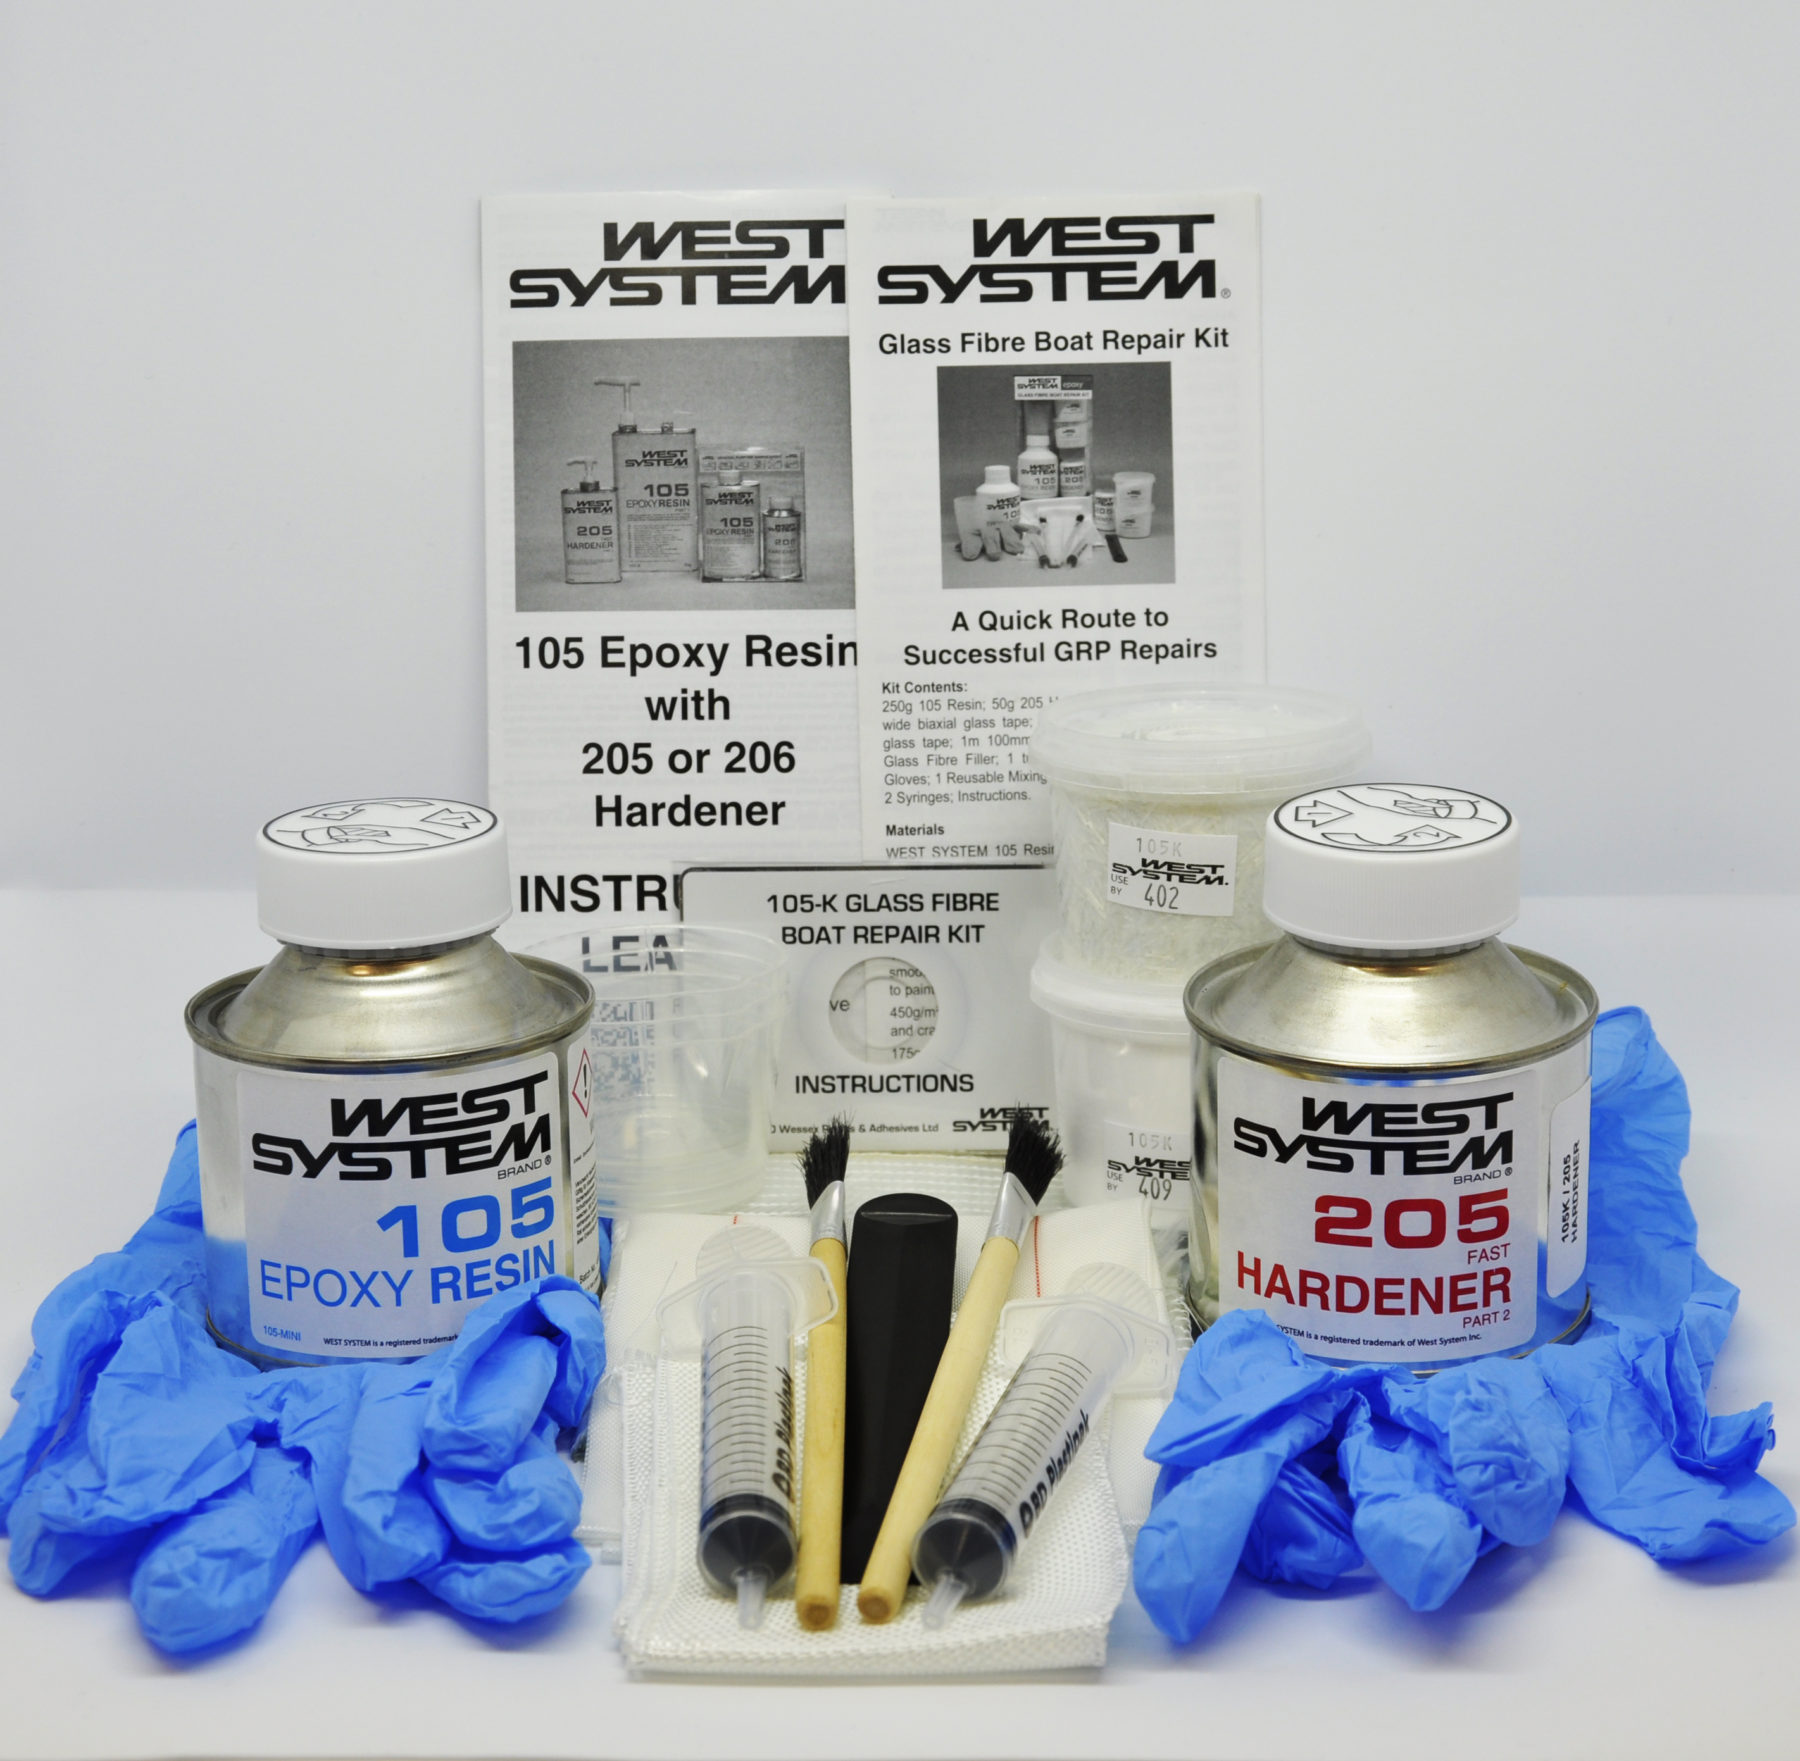 WEST SYSTEM 105-K Glass Fibre Boat Repair Kit improved and upgraded